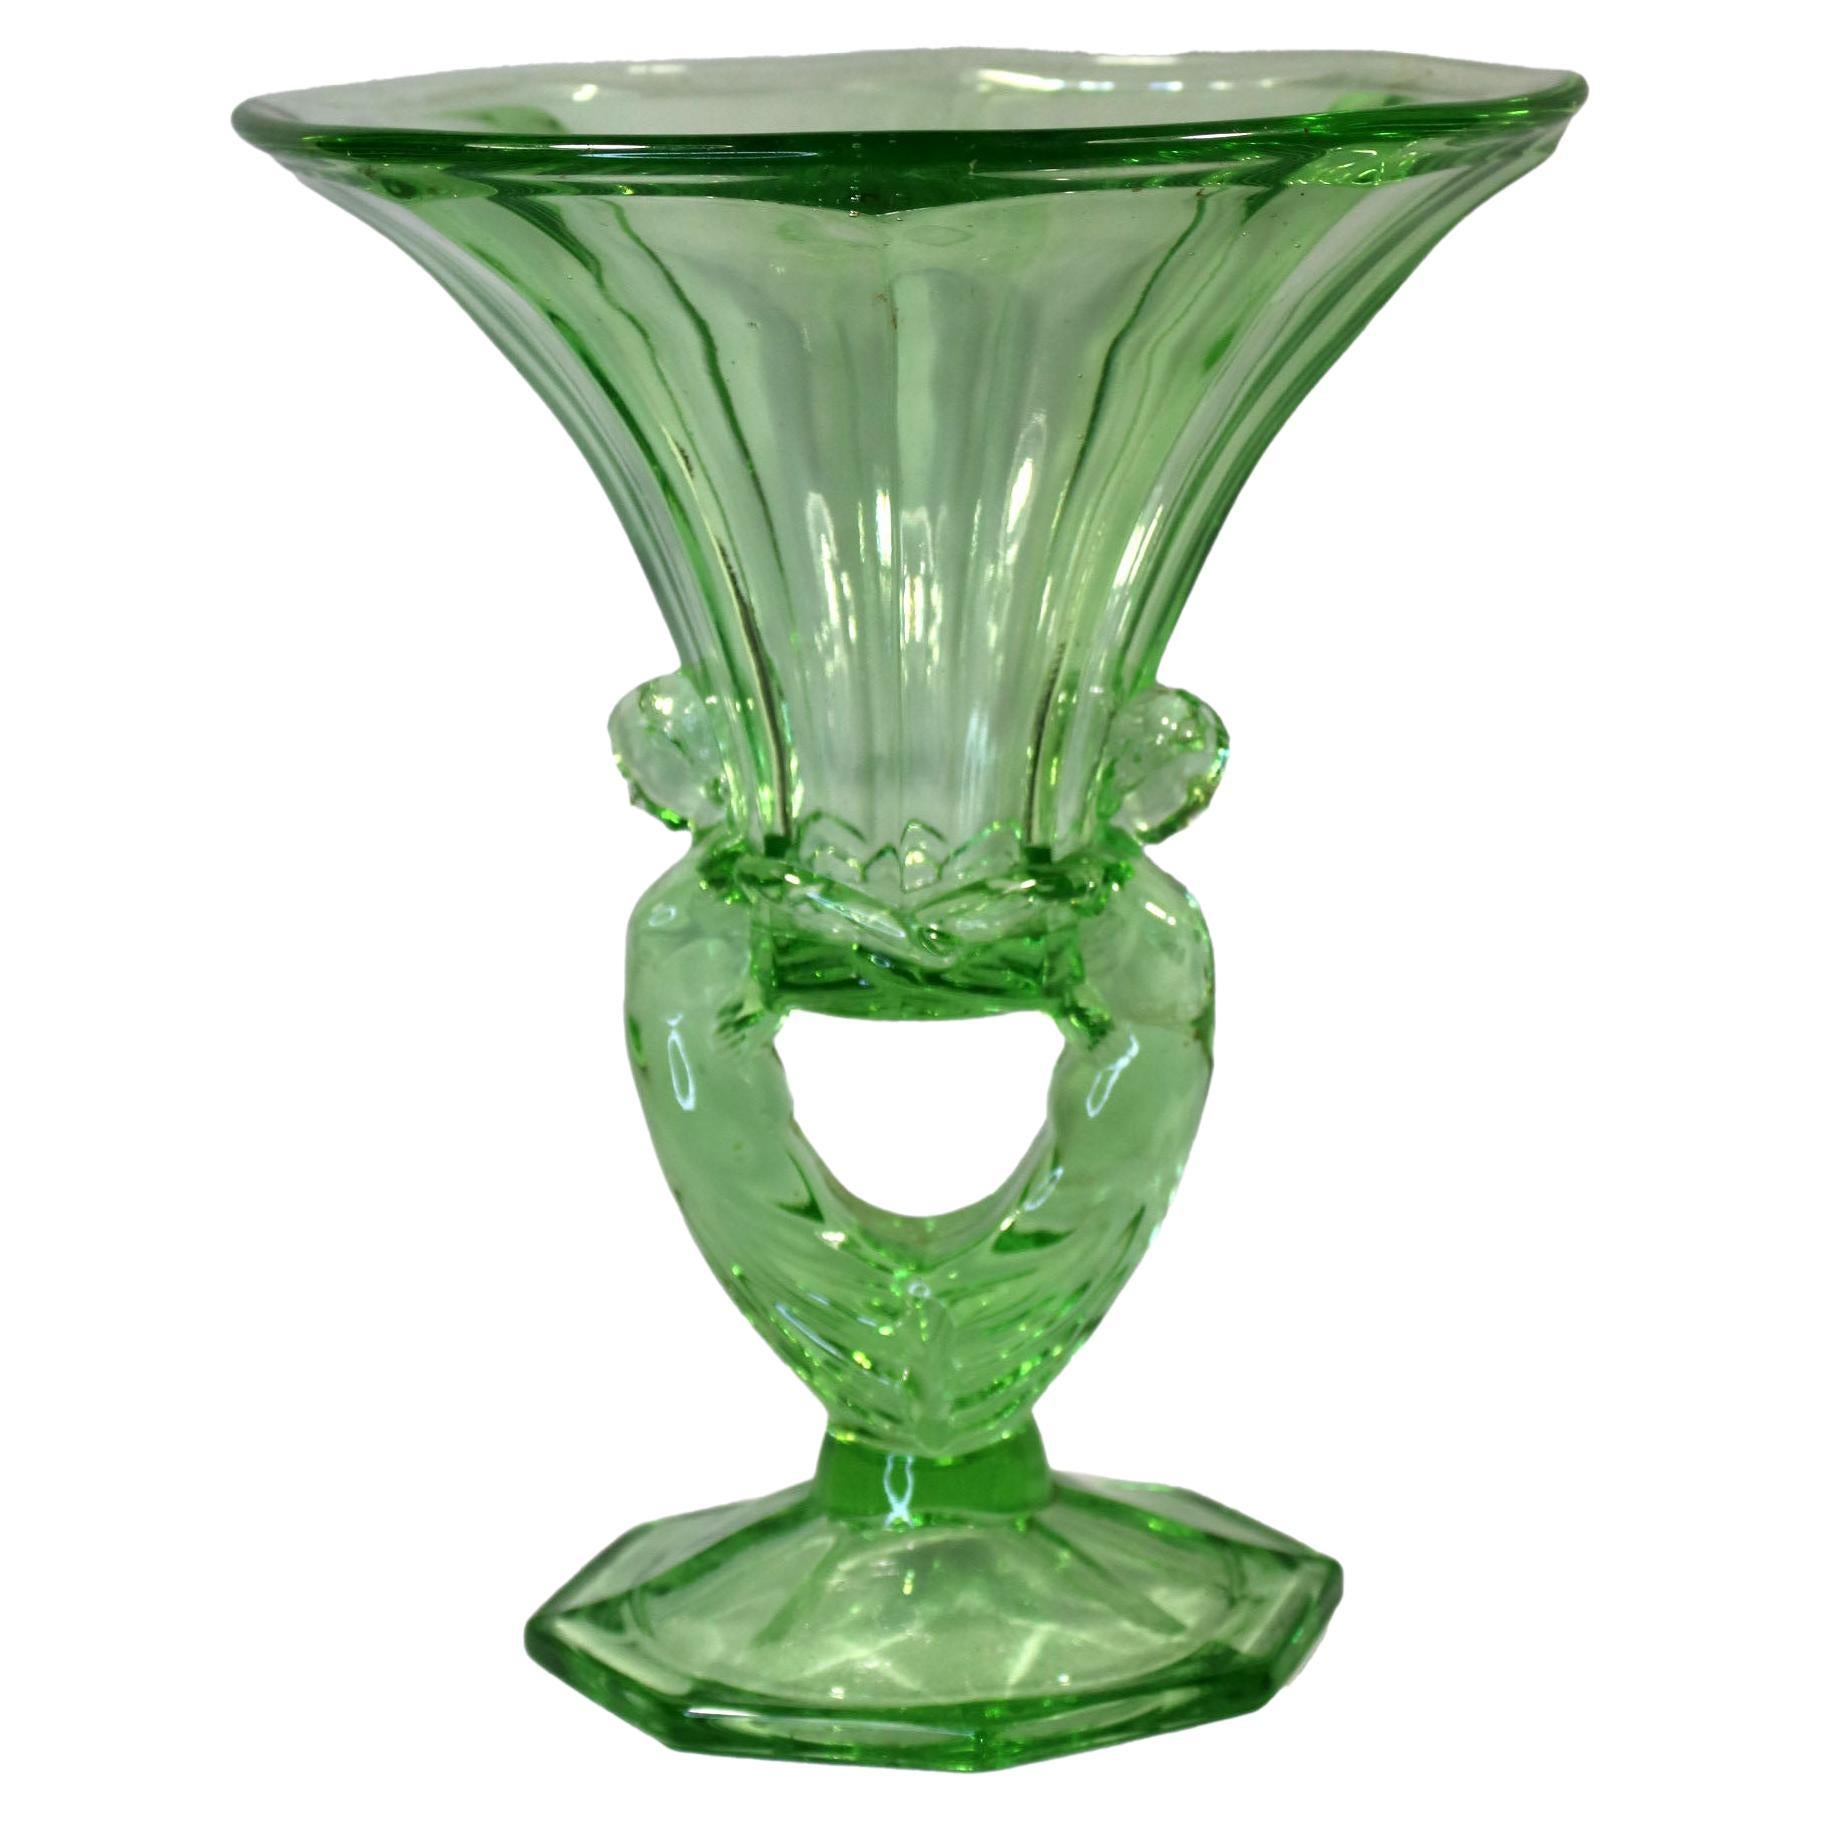 Vase From The Secession Period